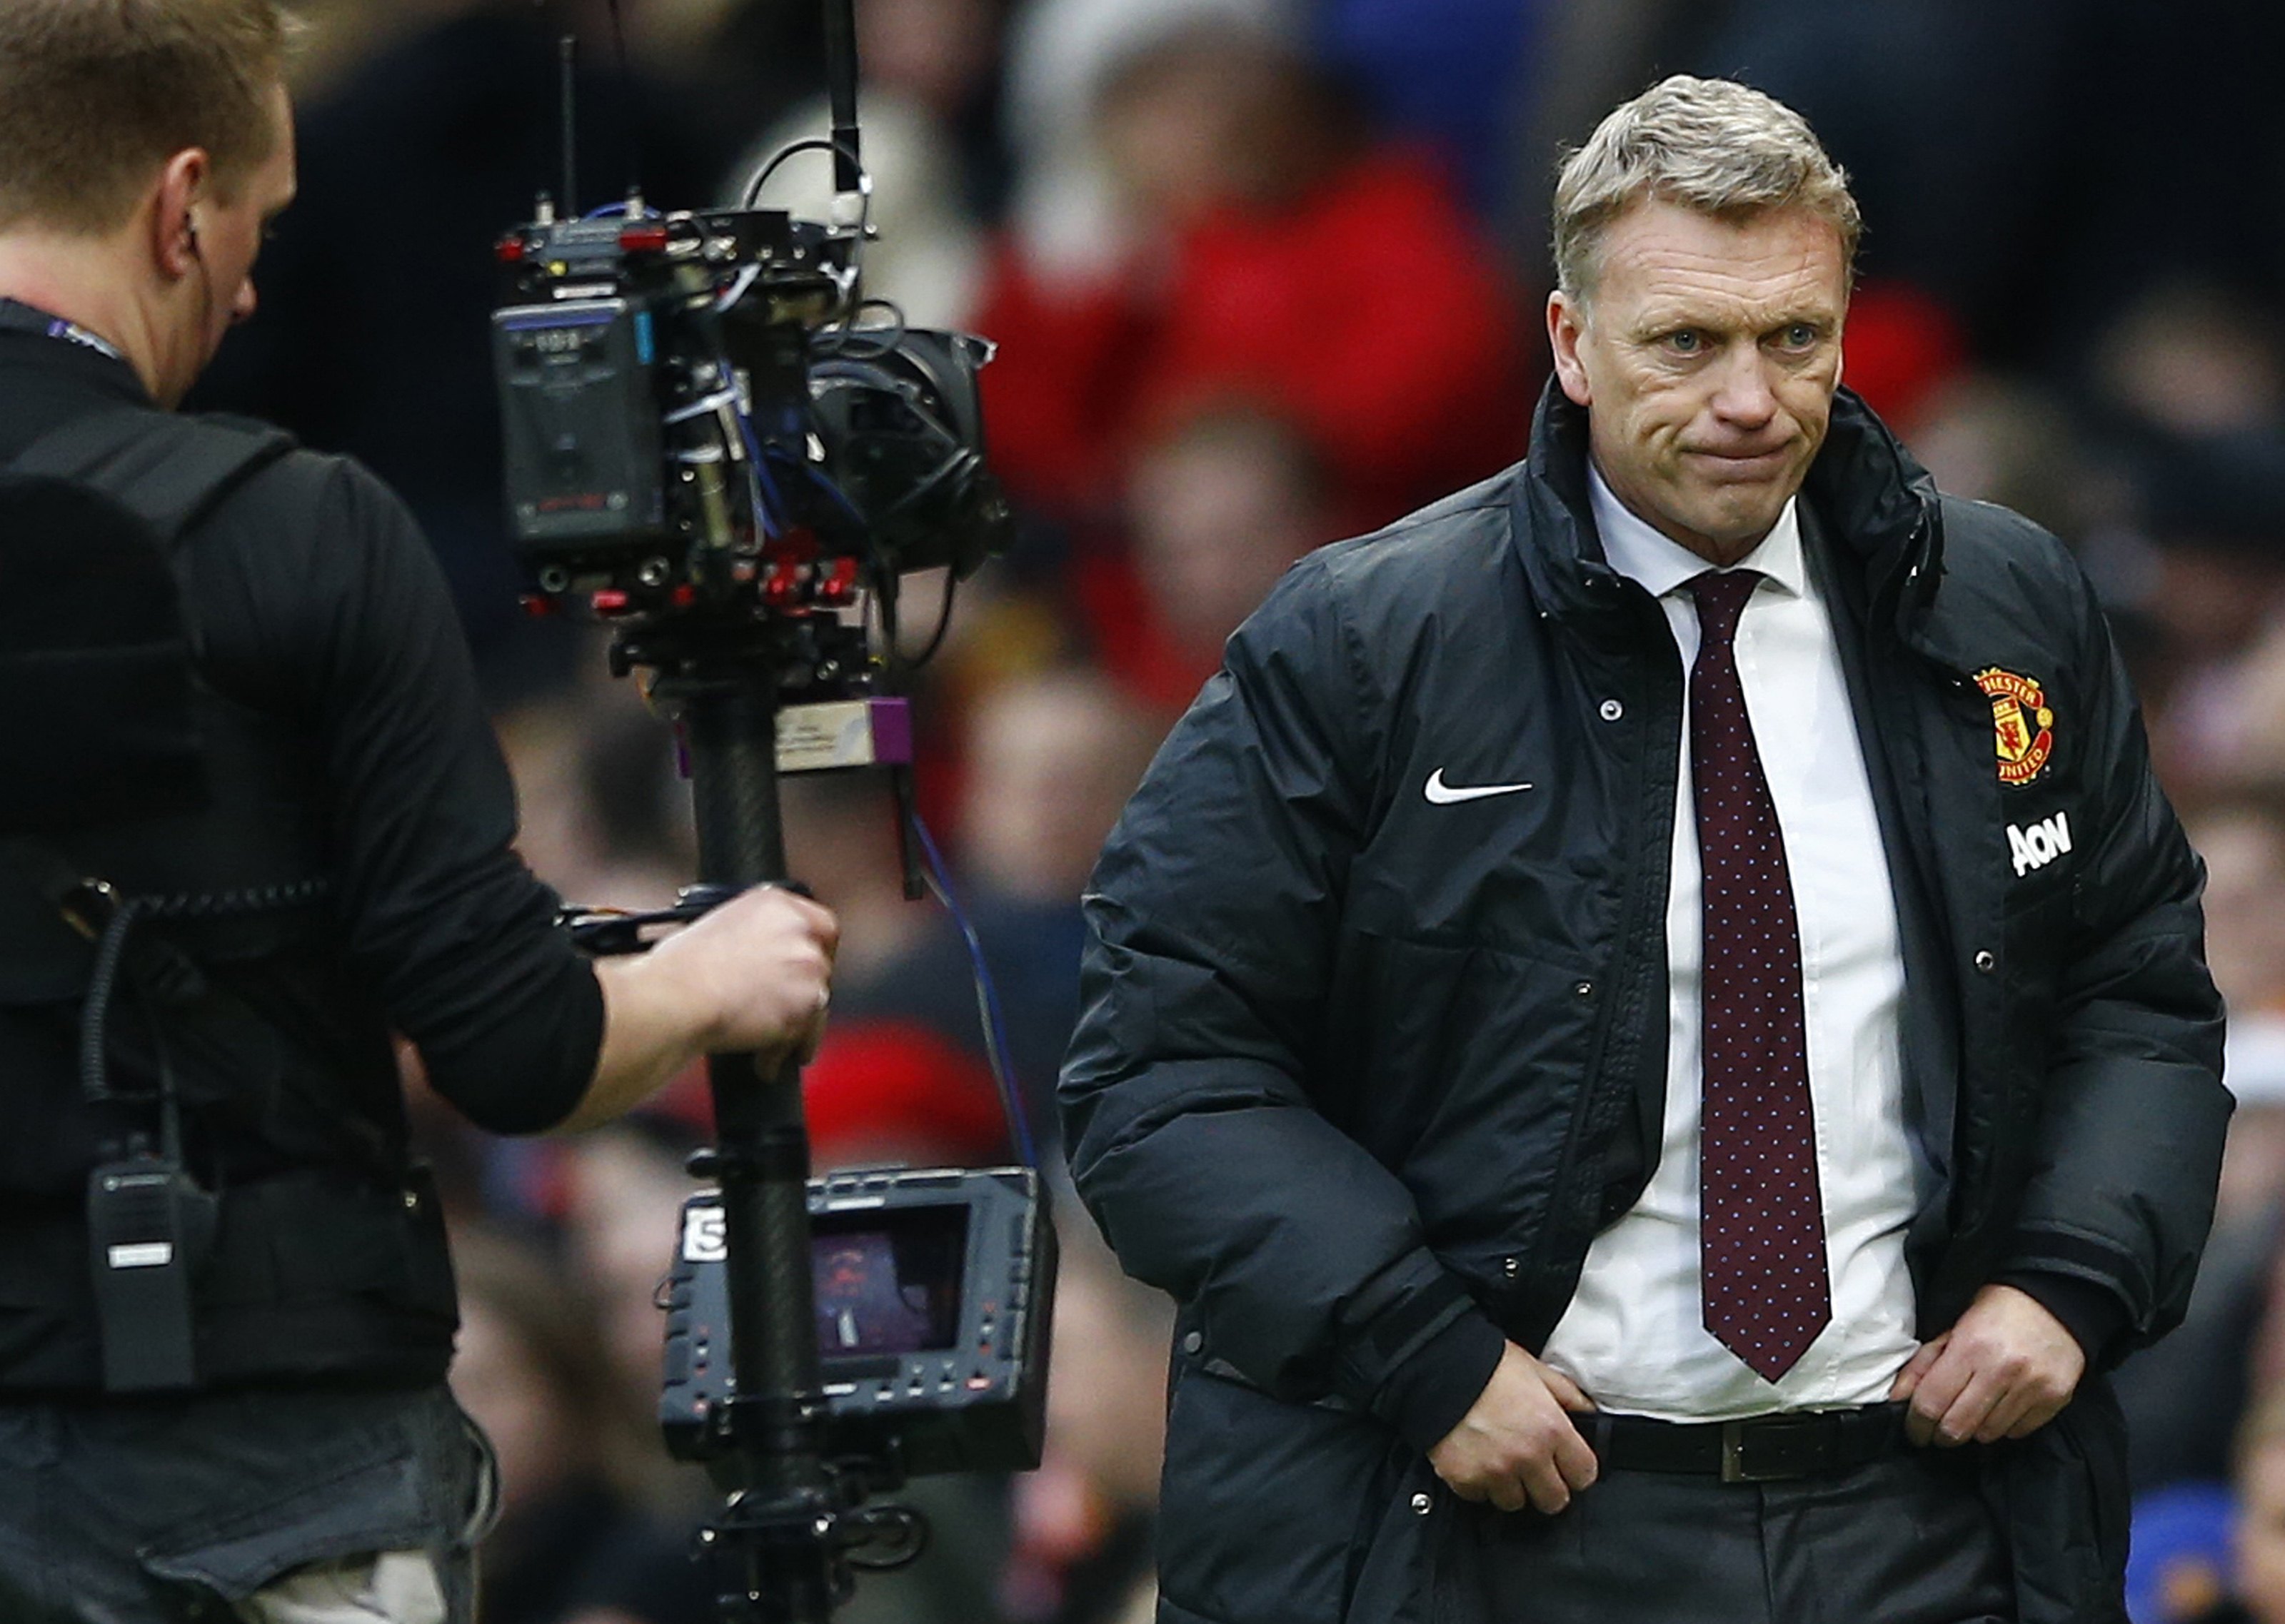 Man Utd shares jump 6% after manager Moyes booted